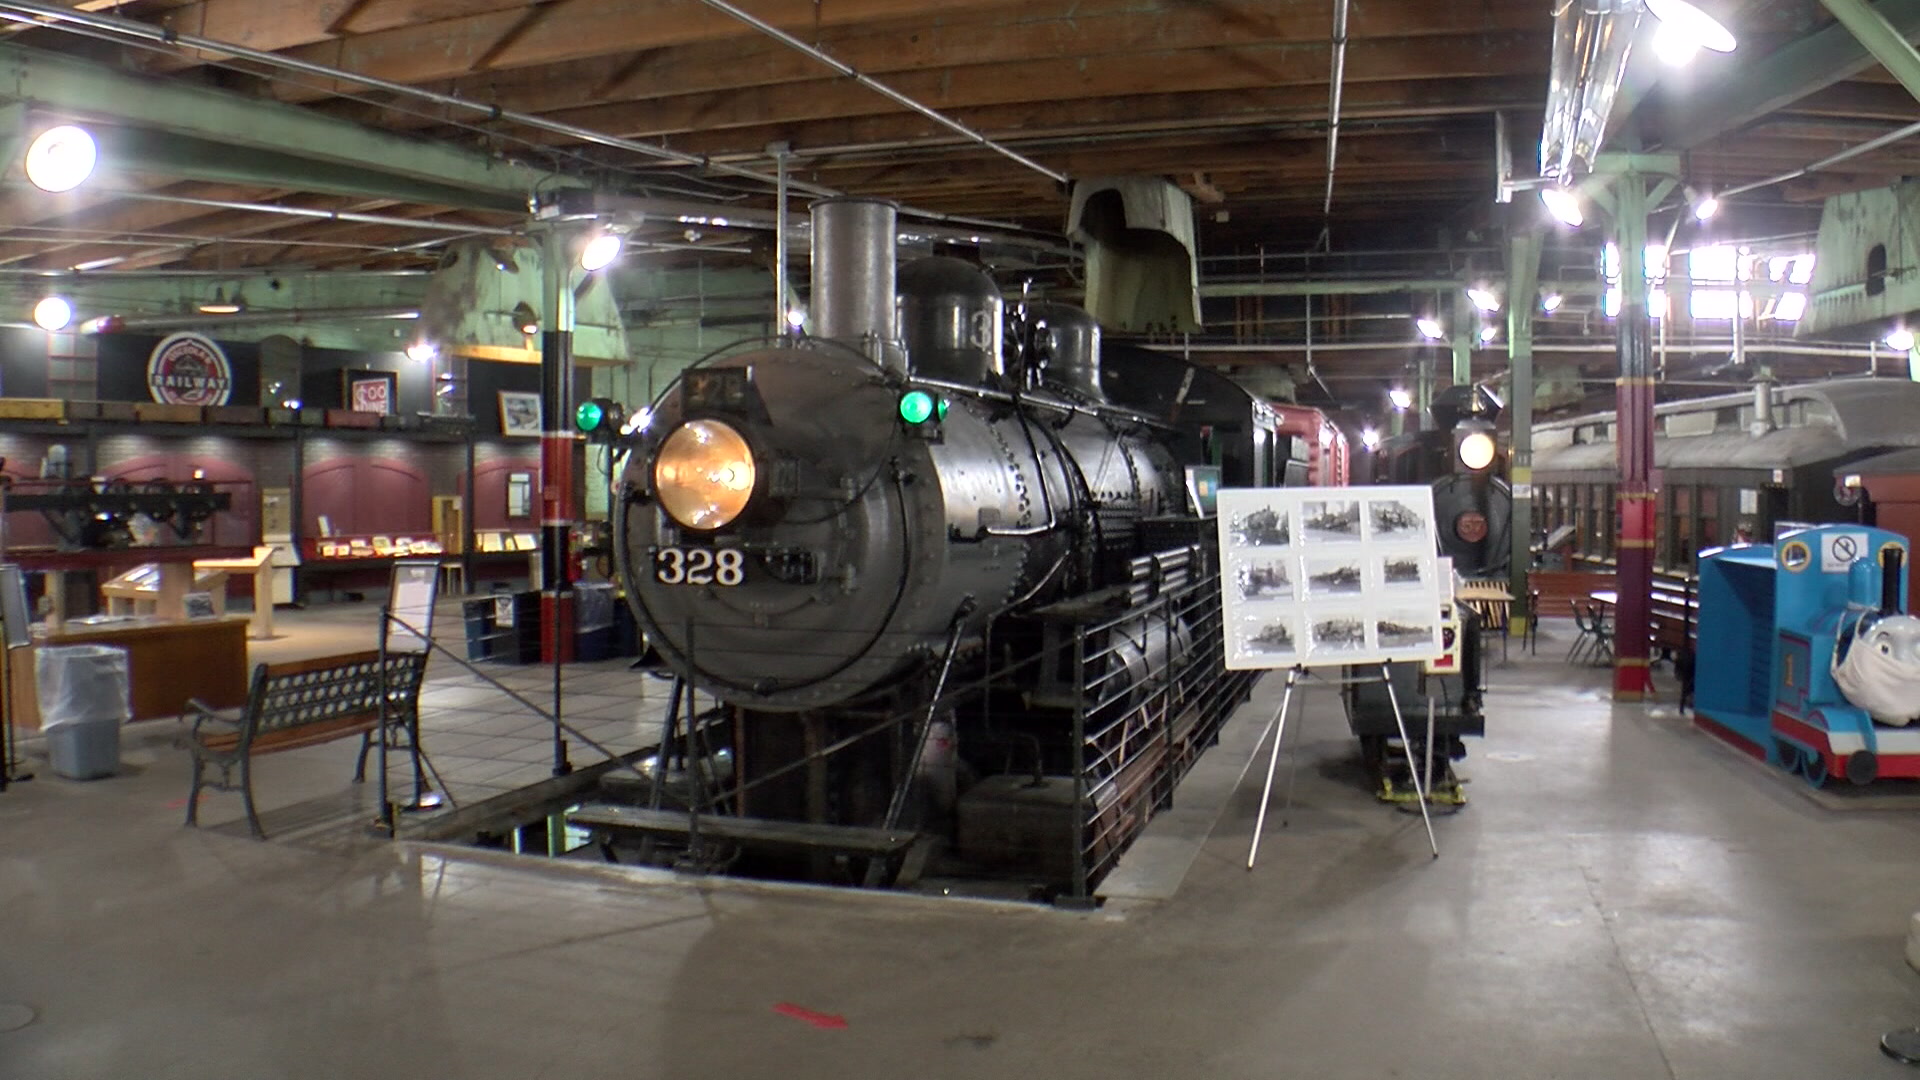 ‘Everybody Loves To Ride The Train’: It’s Grand Central Station At Minnesota Transportation Museum